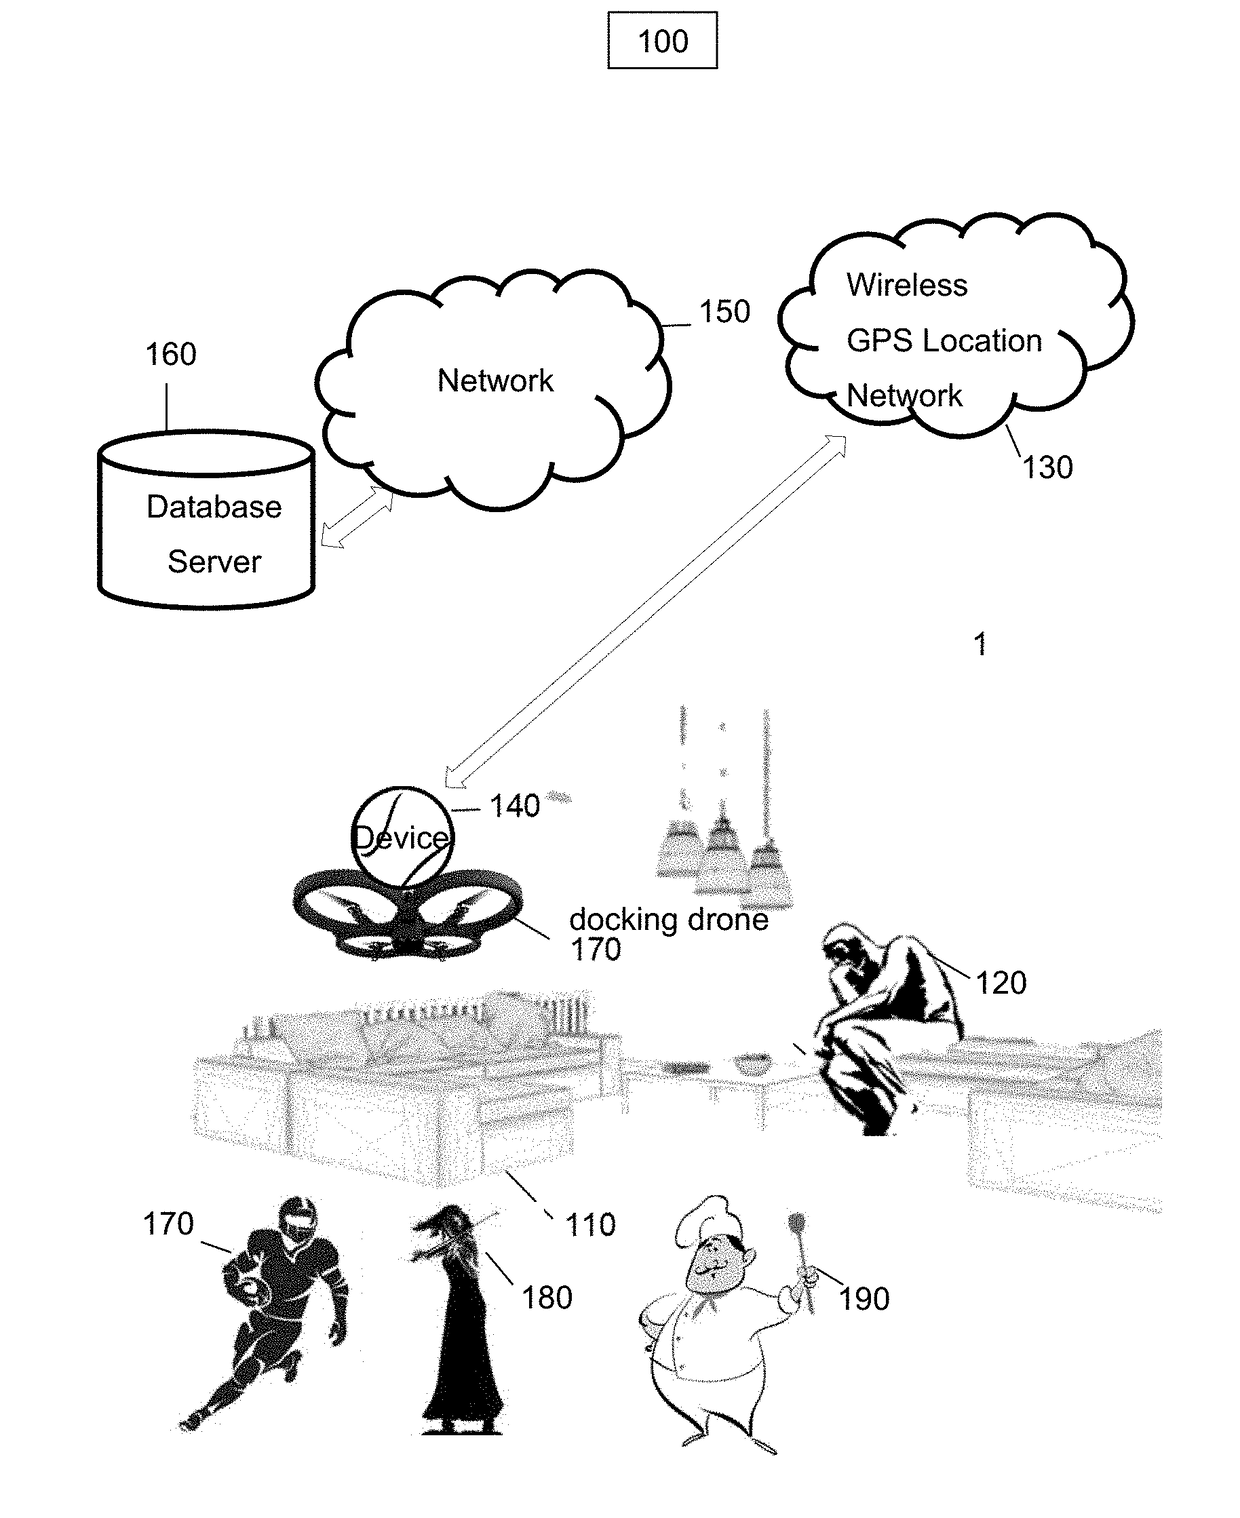 Mobile computer ball device with drone docking station and wrist band to couple with eye glasses or contacts for mixed reality, virtual reality and augmented reality